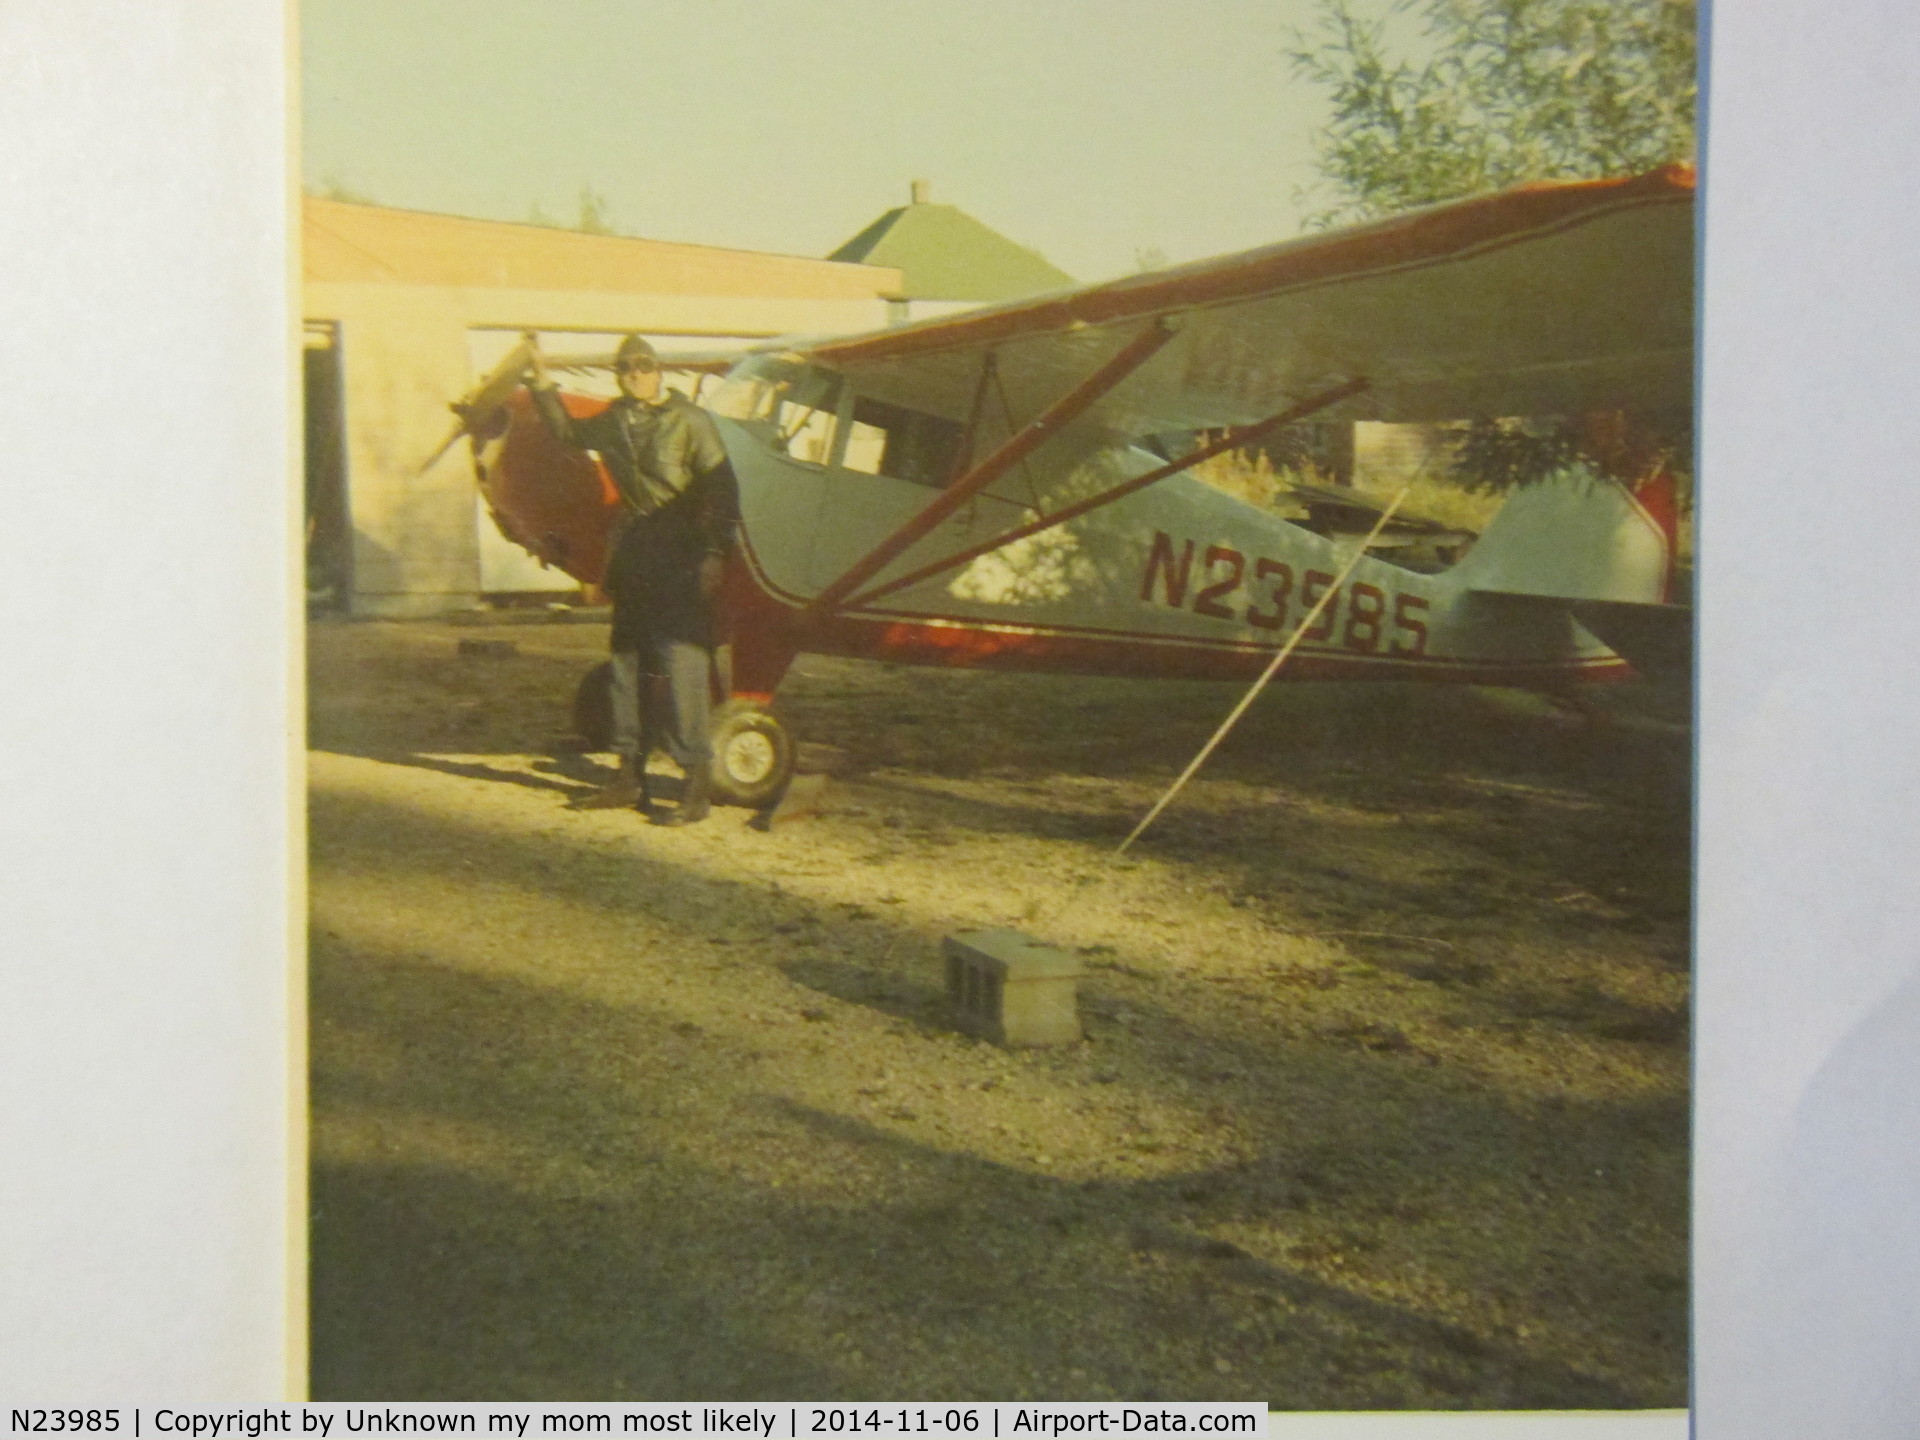 N23985, 1939 Aeronca 65-C C/N C-6469, Looks to be my dads old plane same number. Pic taken in International Falls MN Our front yard. My dad standing by it and ready to go. Vary early 1970s